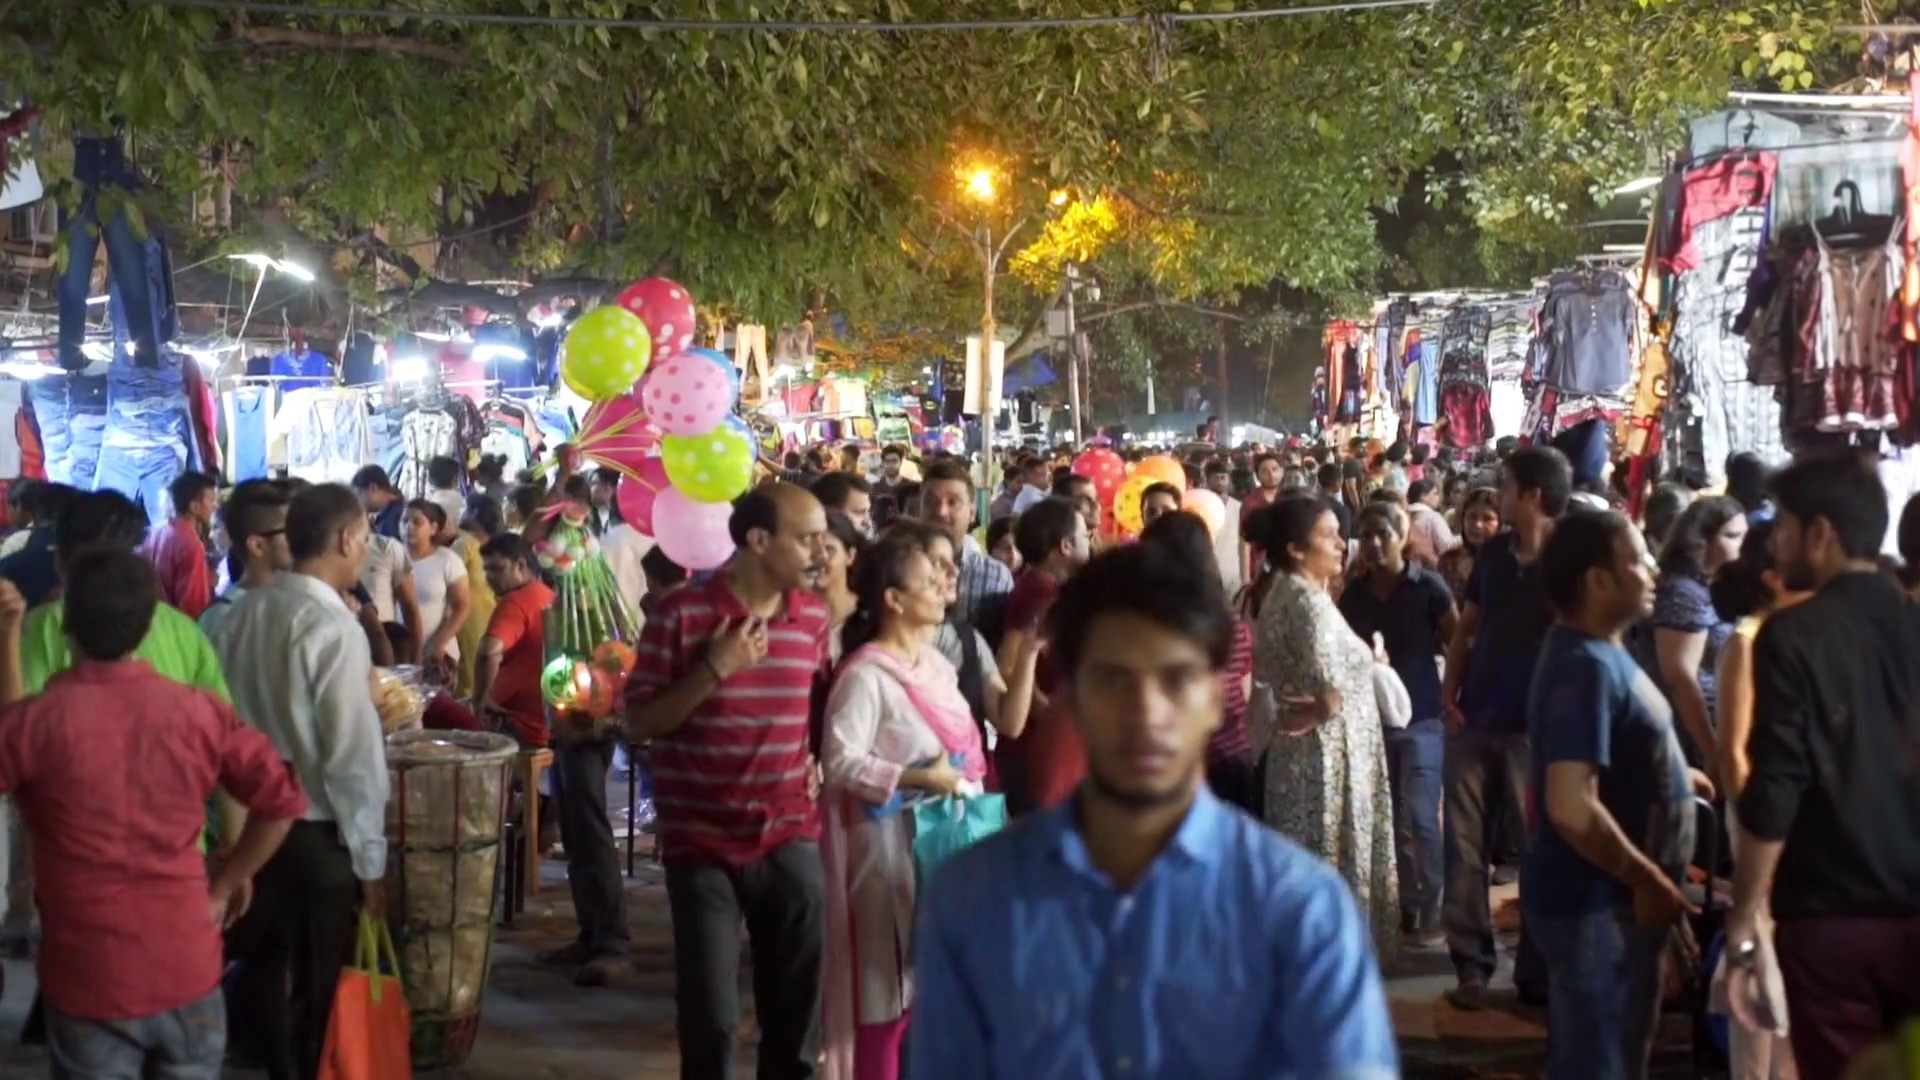 Crowd of people walk, shop for clothes, market, nighttime, New Delhi ...